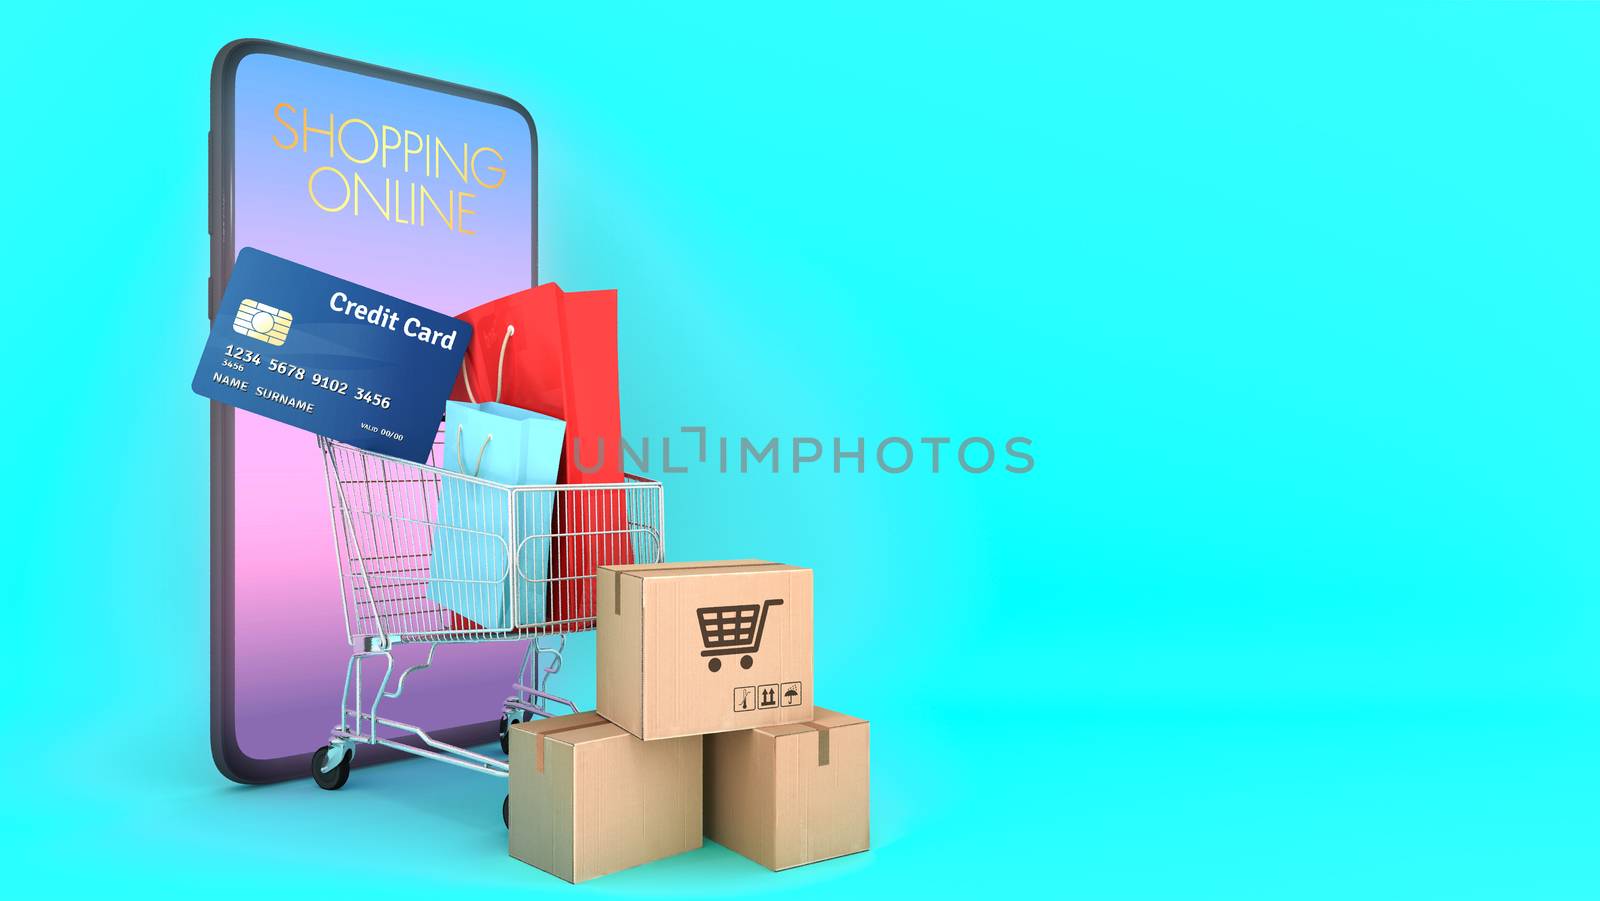 Many Paper boxes and Colourful paper shopping bags and credit card in a shopping cart appeared from smartphones screen., shopping online or shopaholic concept, 3D rendering.